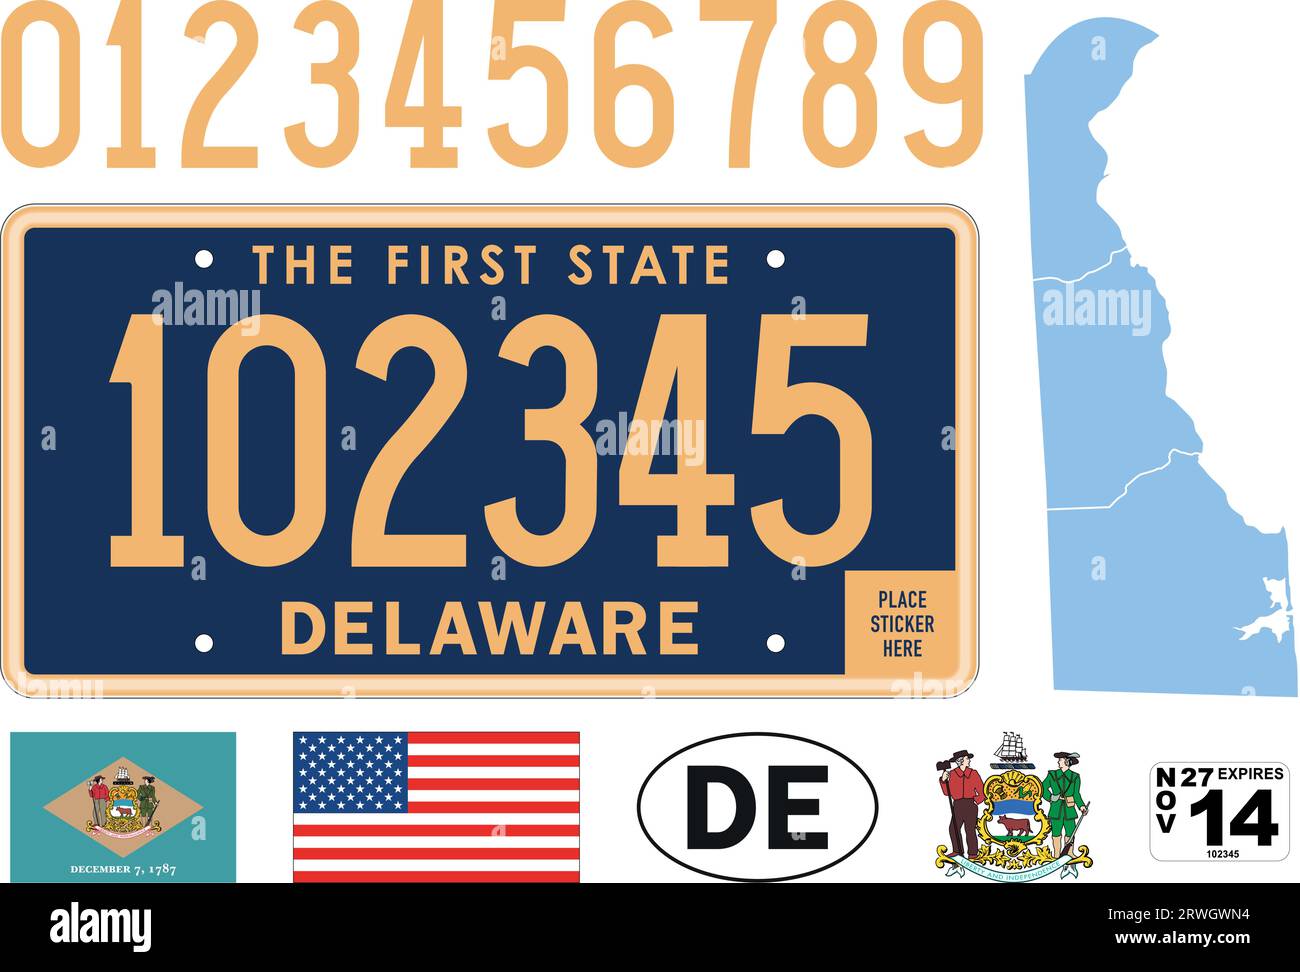 Delaware car license plate pattern, numbers and symbols, vector illustration, USA Stock Vector